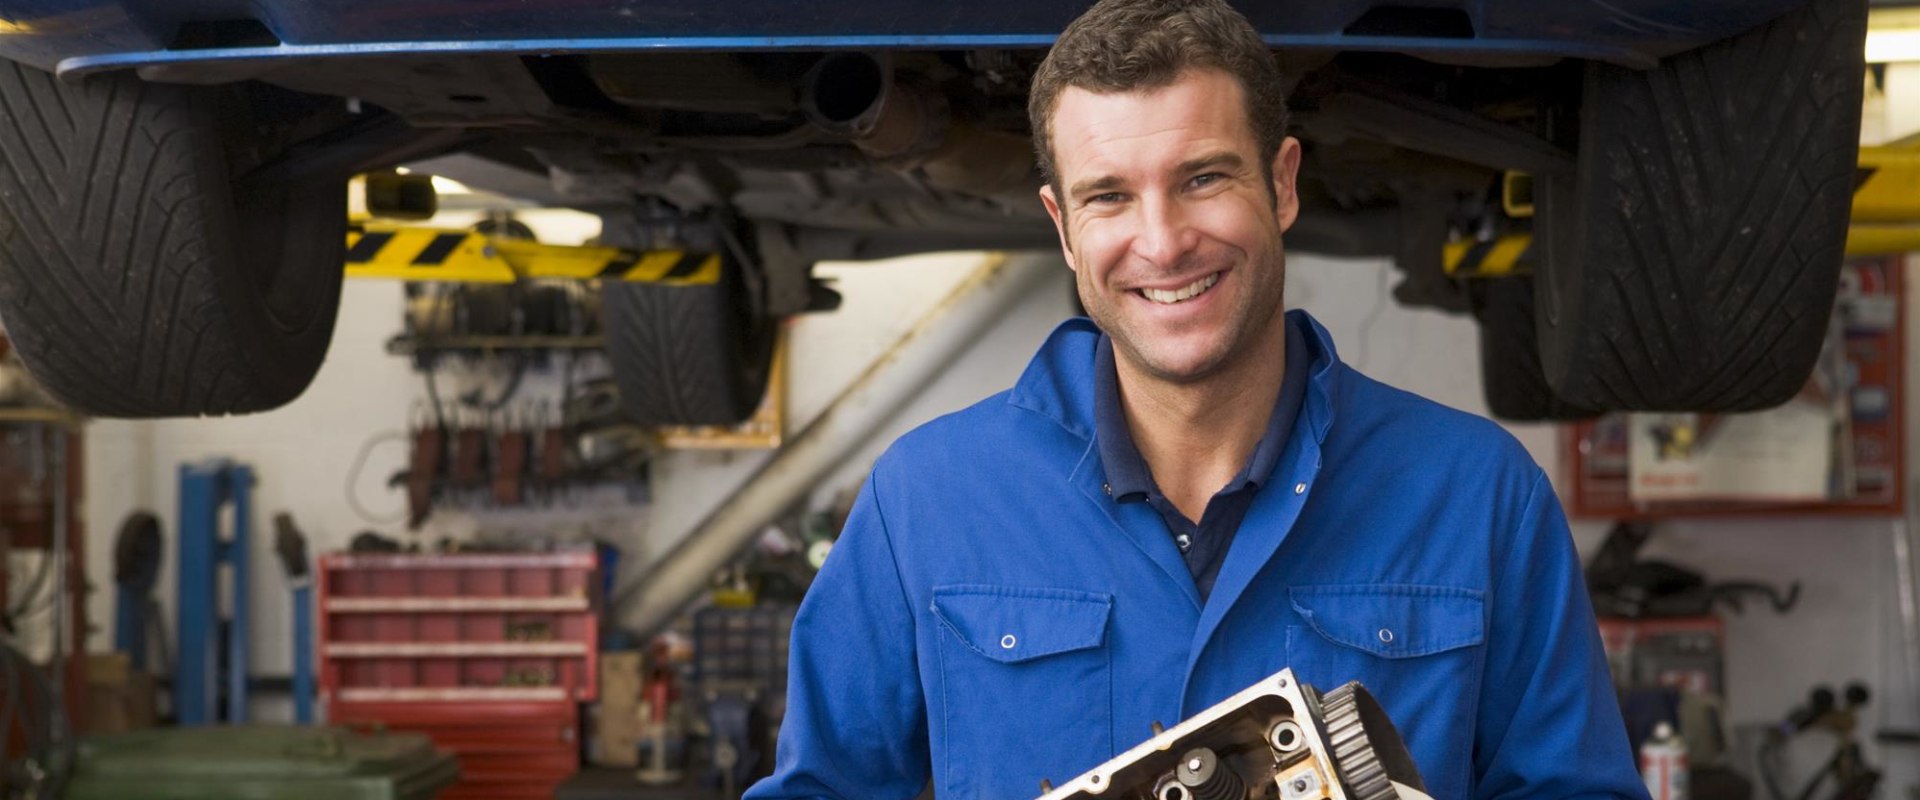 Safety Precautions for Automotive Maintenance and Repair